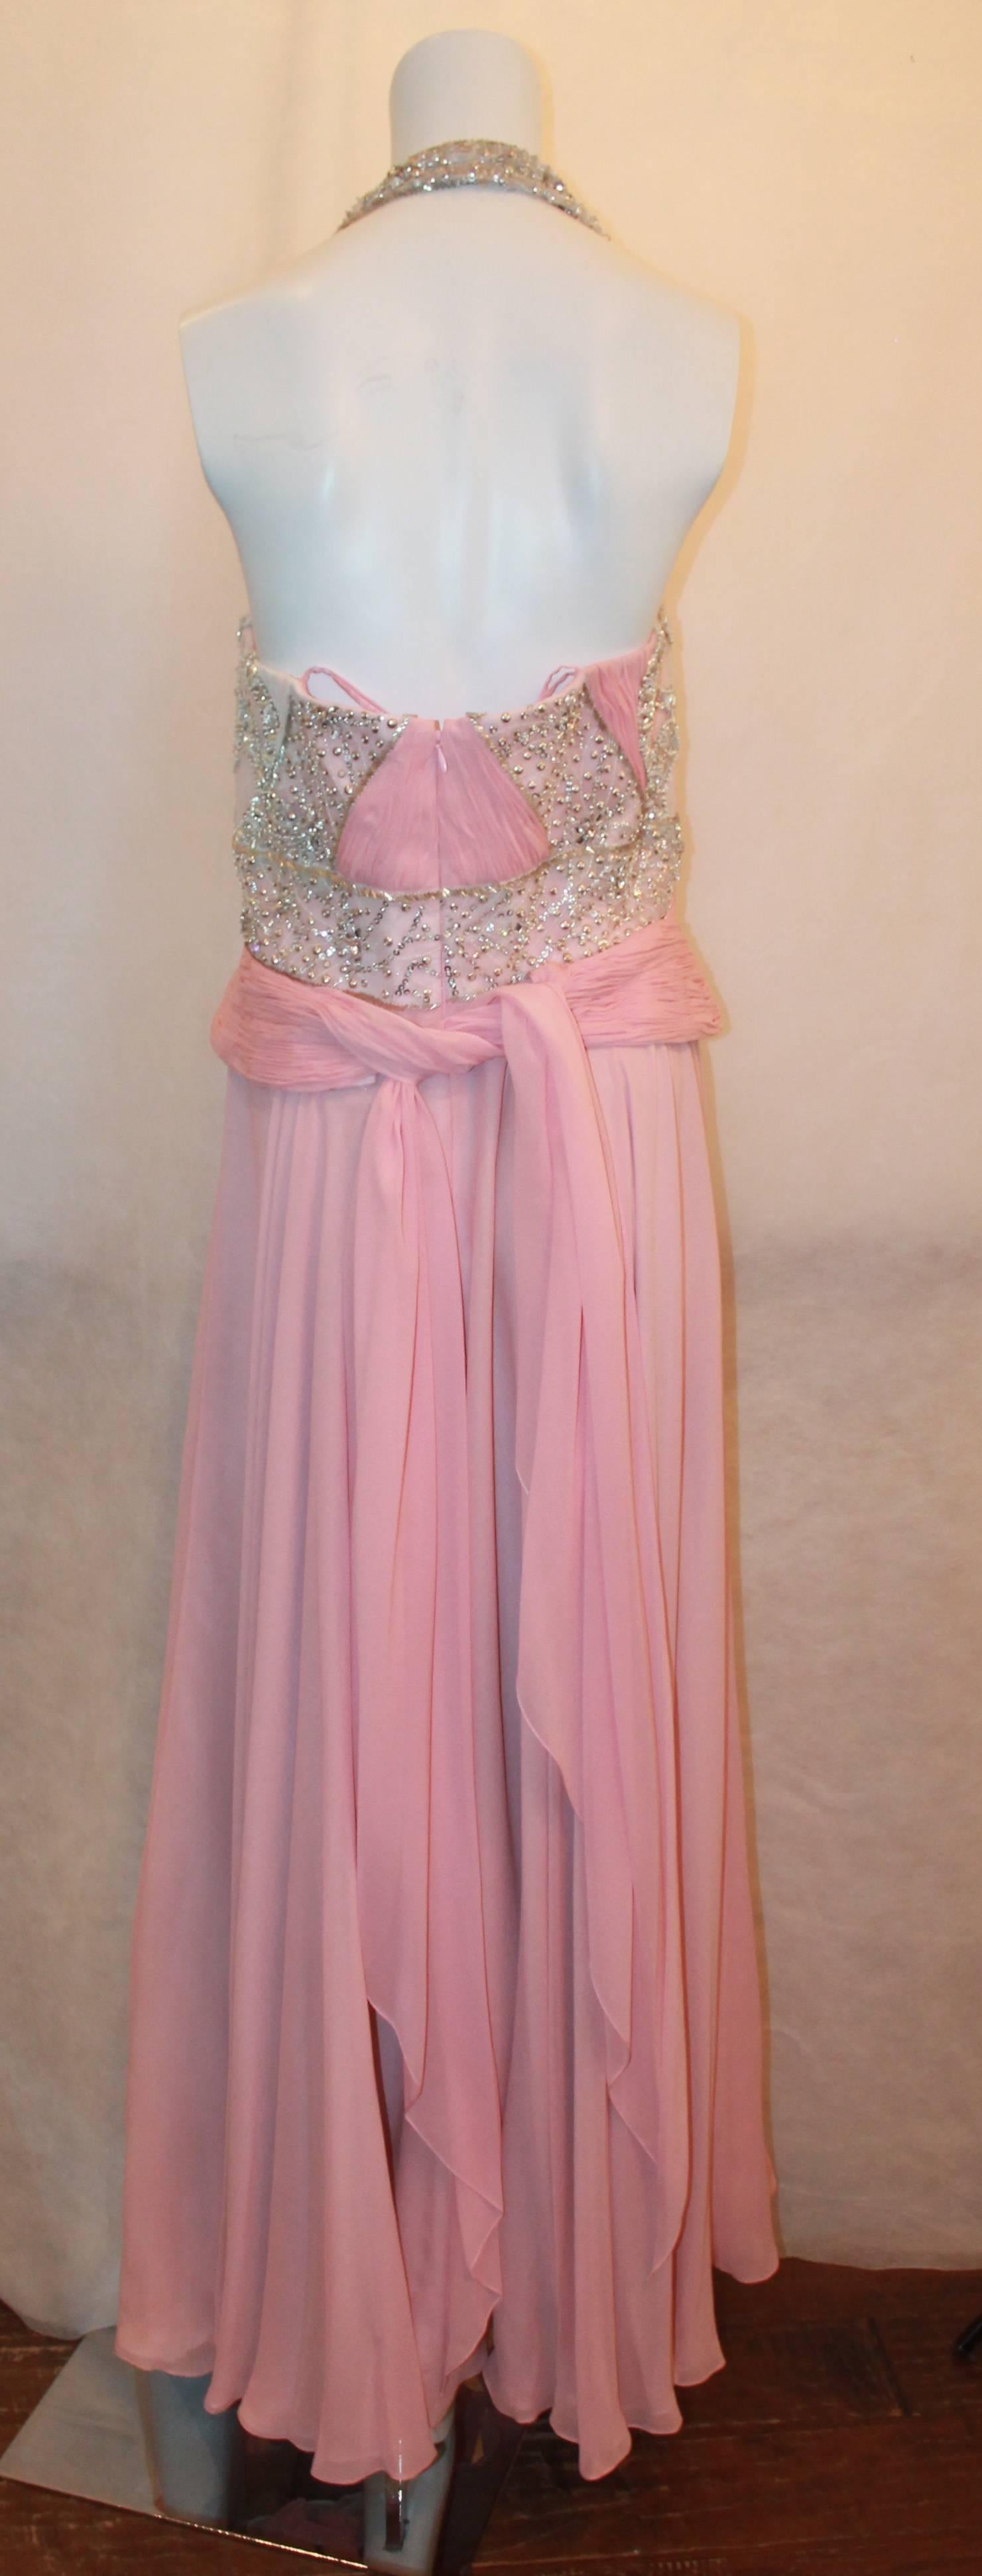 Bill Blass Pink Silk Chiffon & Mesh Gown with Beading - 10 In Good Condition In West Palm Beach, FL